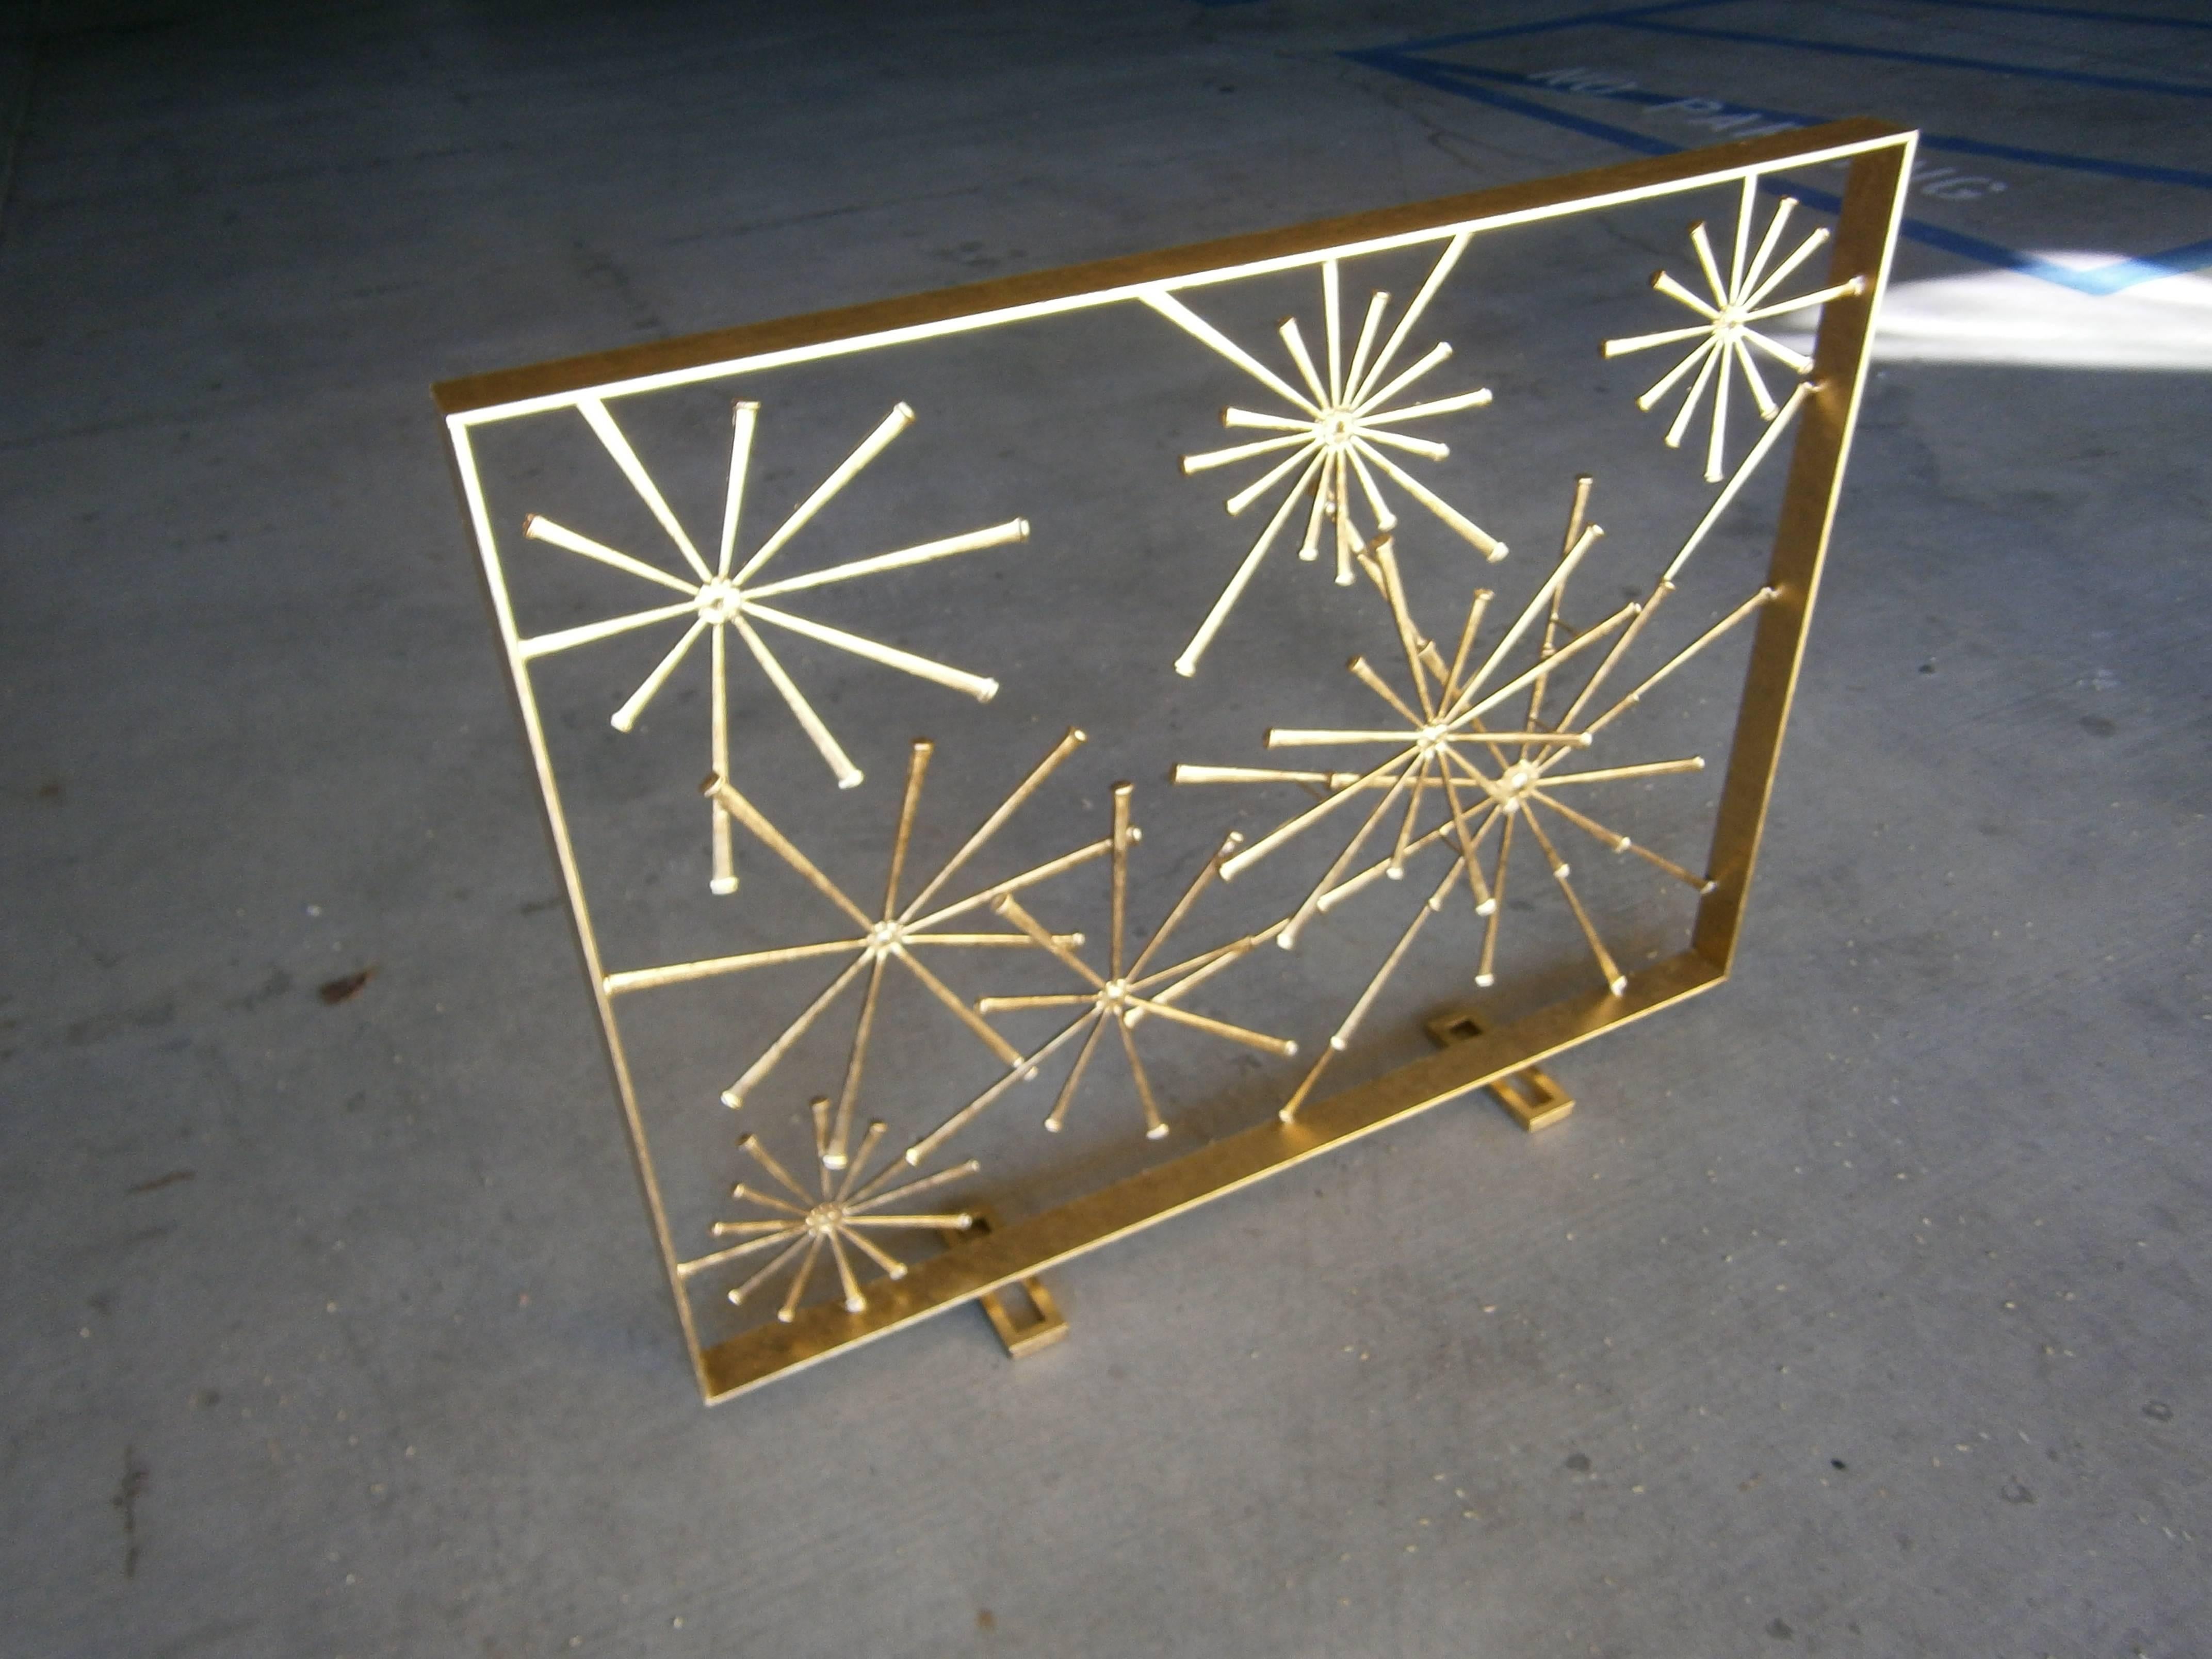 A welded and gilded "starburst" fire screen by American artist Del Williams.
Please see our other listings to view other fire screen patterns by the artist. 

The screen in the photos is a representation of the 